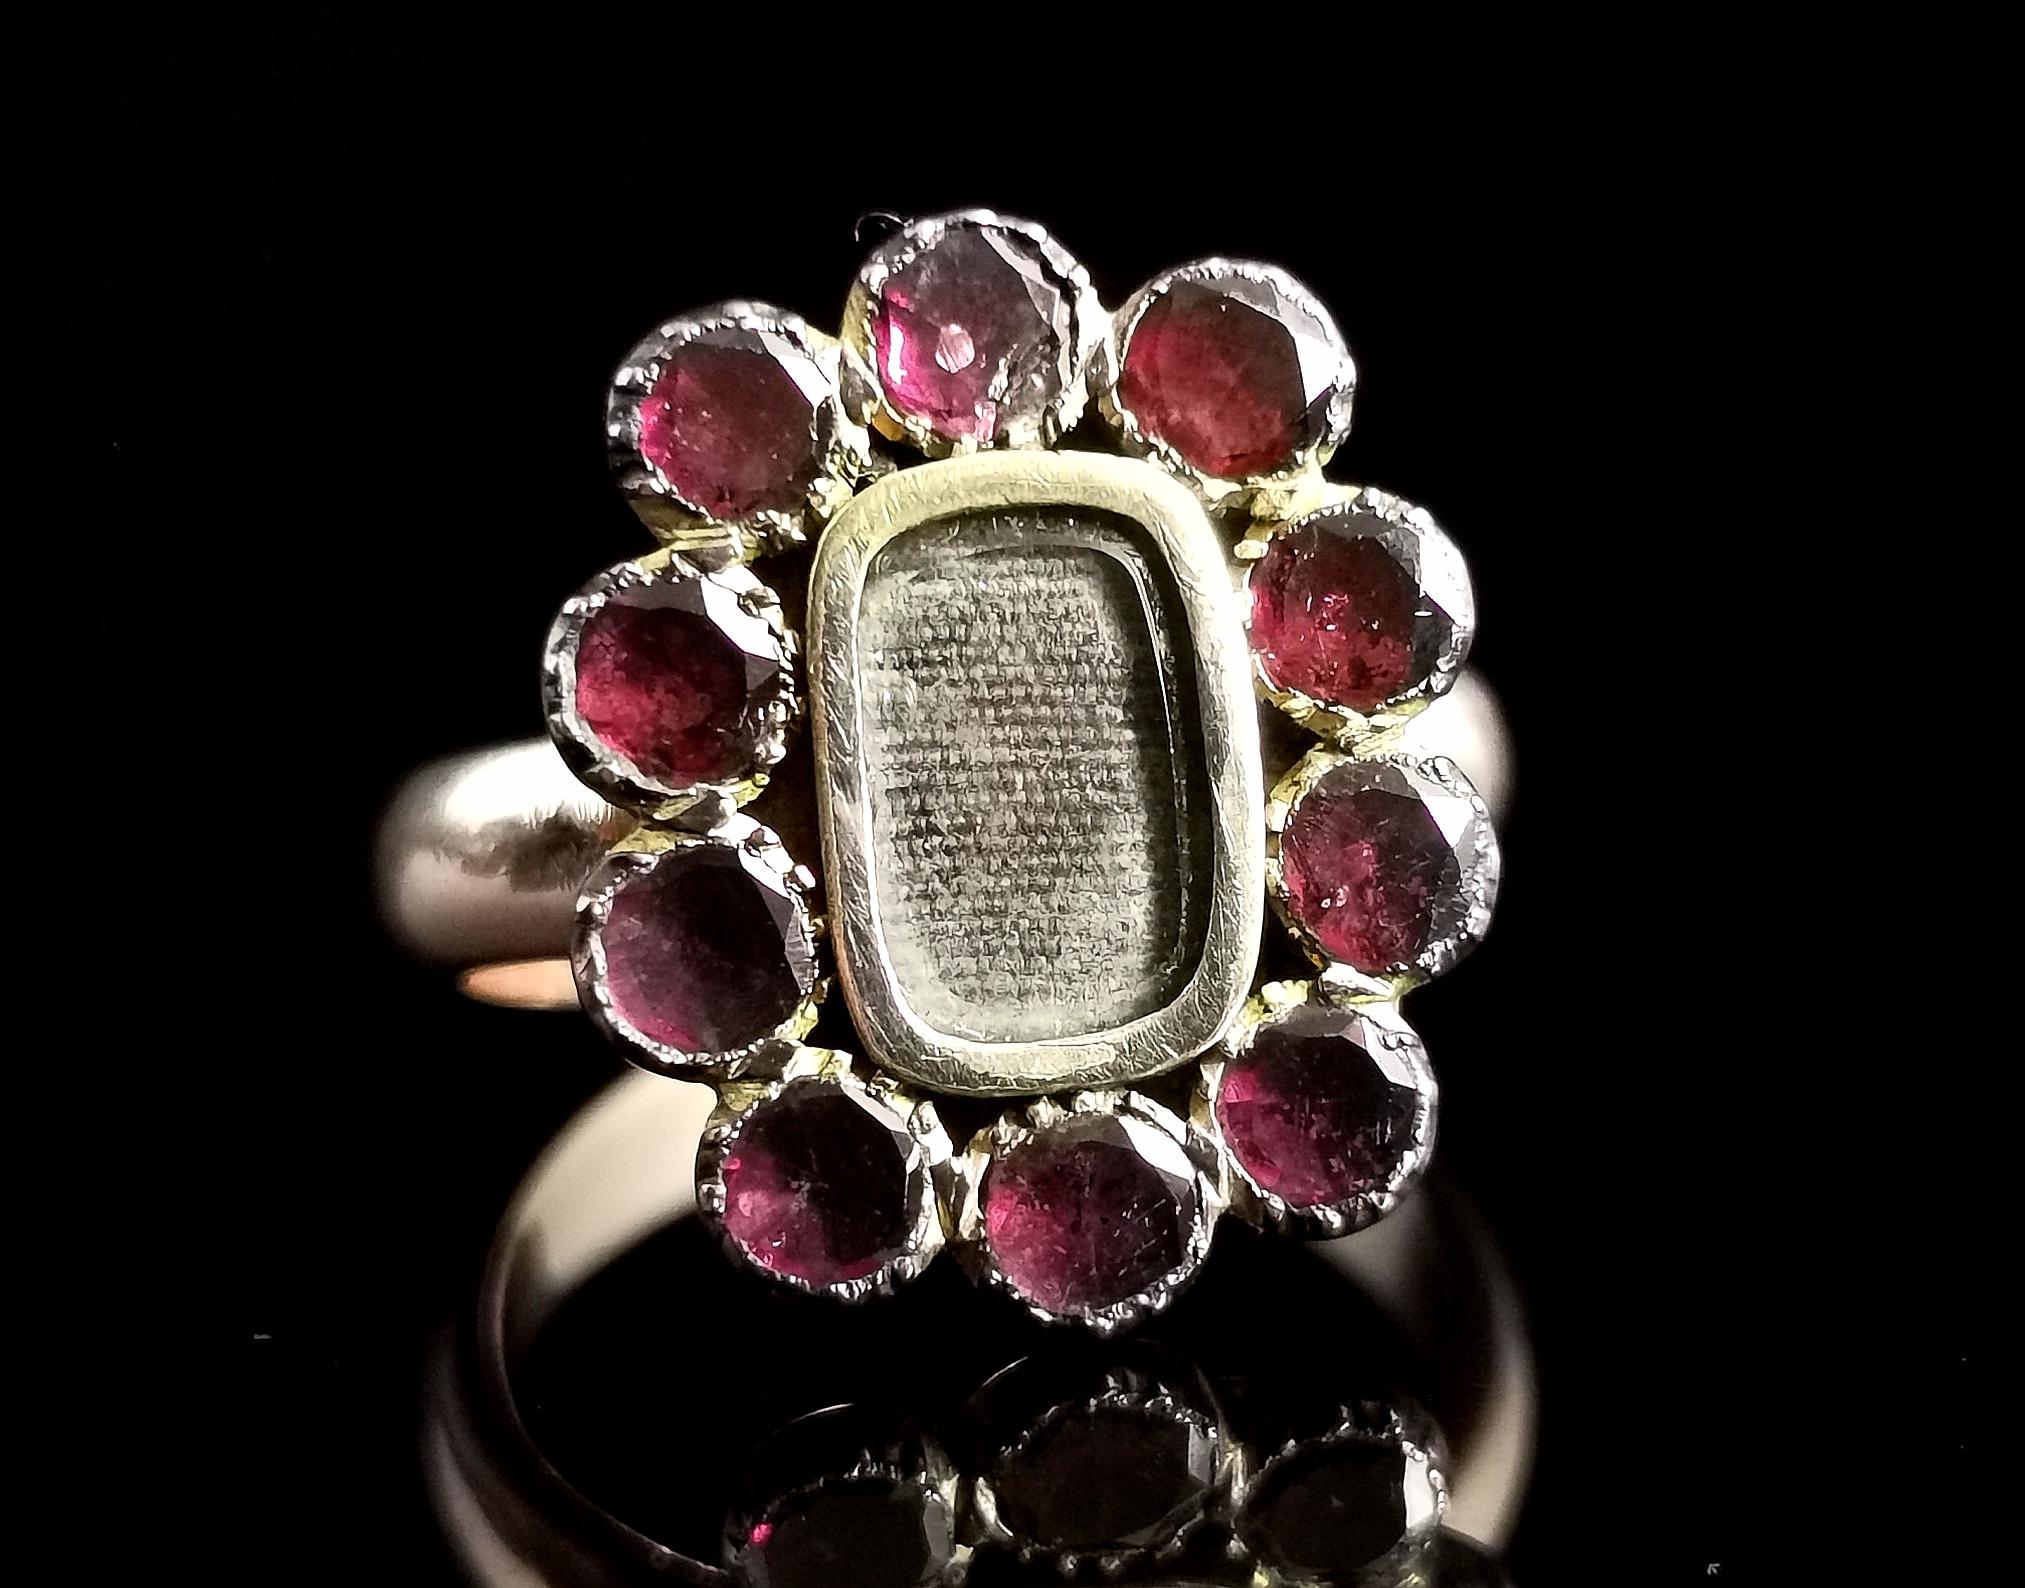 A charming antique Georgian flat cut garnet mourning ring.

Originally converted from a brooch or lace pin this beautiful piece has been made into a ring and it really works!

The face has a halo of deep red flat cut garnets framing the central